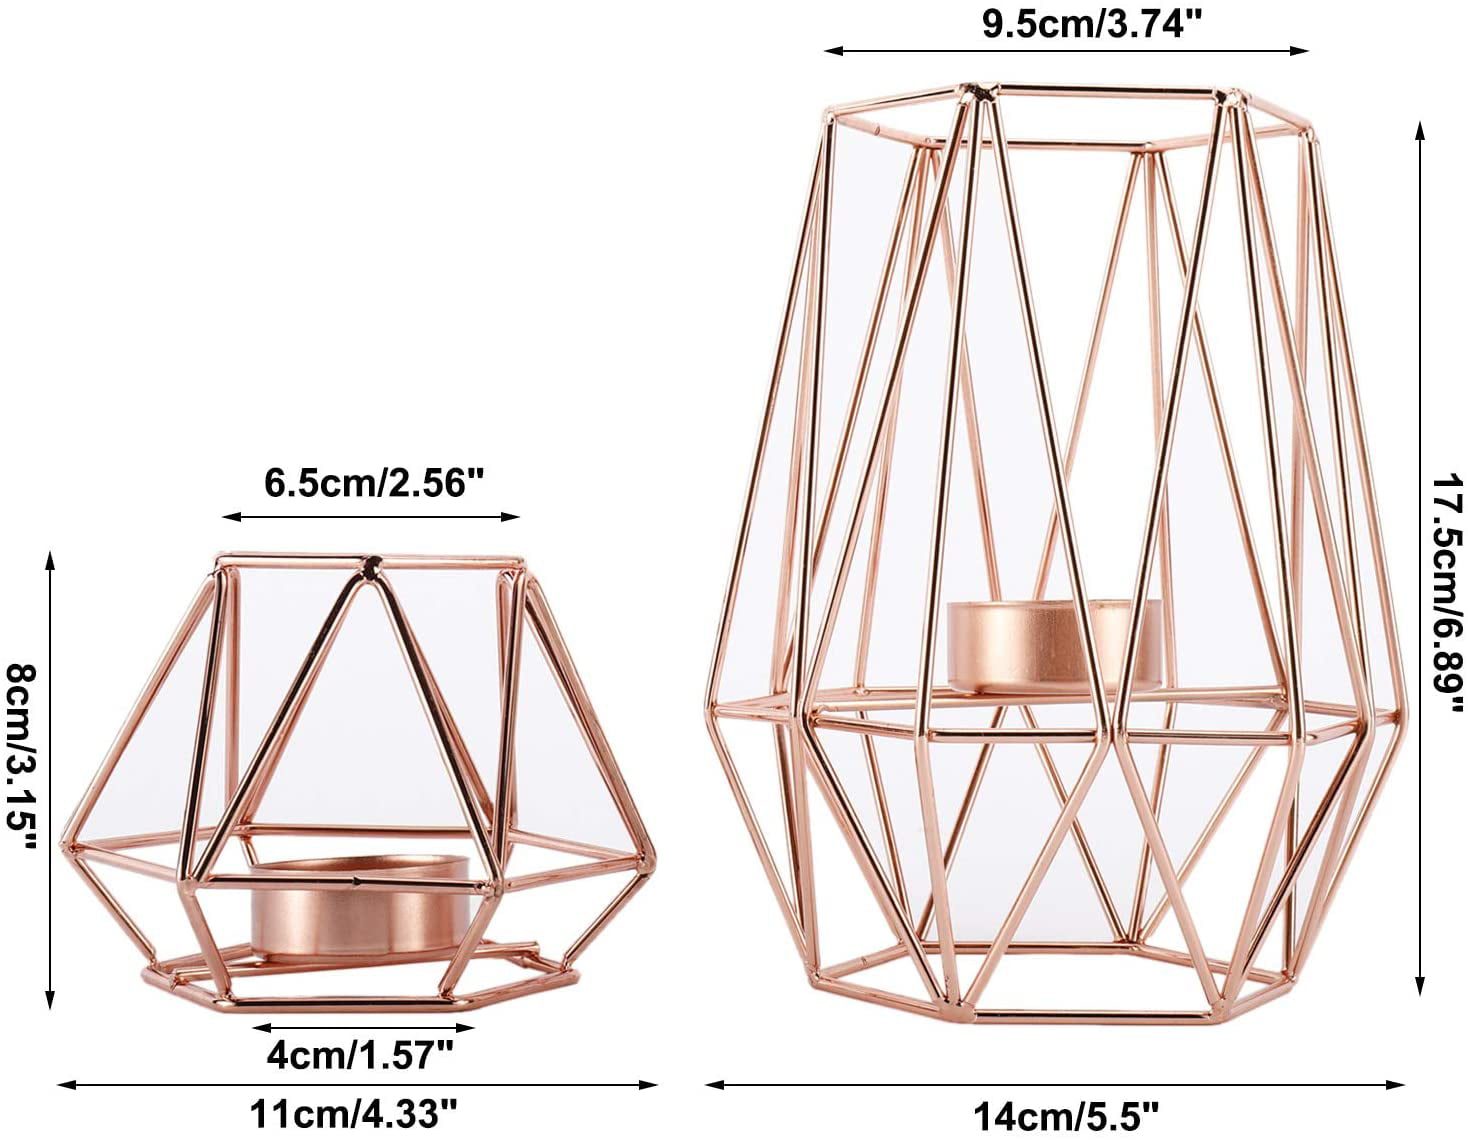 Rose Gold Set of 2 HighFree Geometric Candle Holders Metal Wire Iron Tealight Candle Holders for Tables Decor Living Room Bathroom Decorations